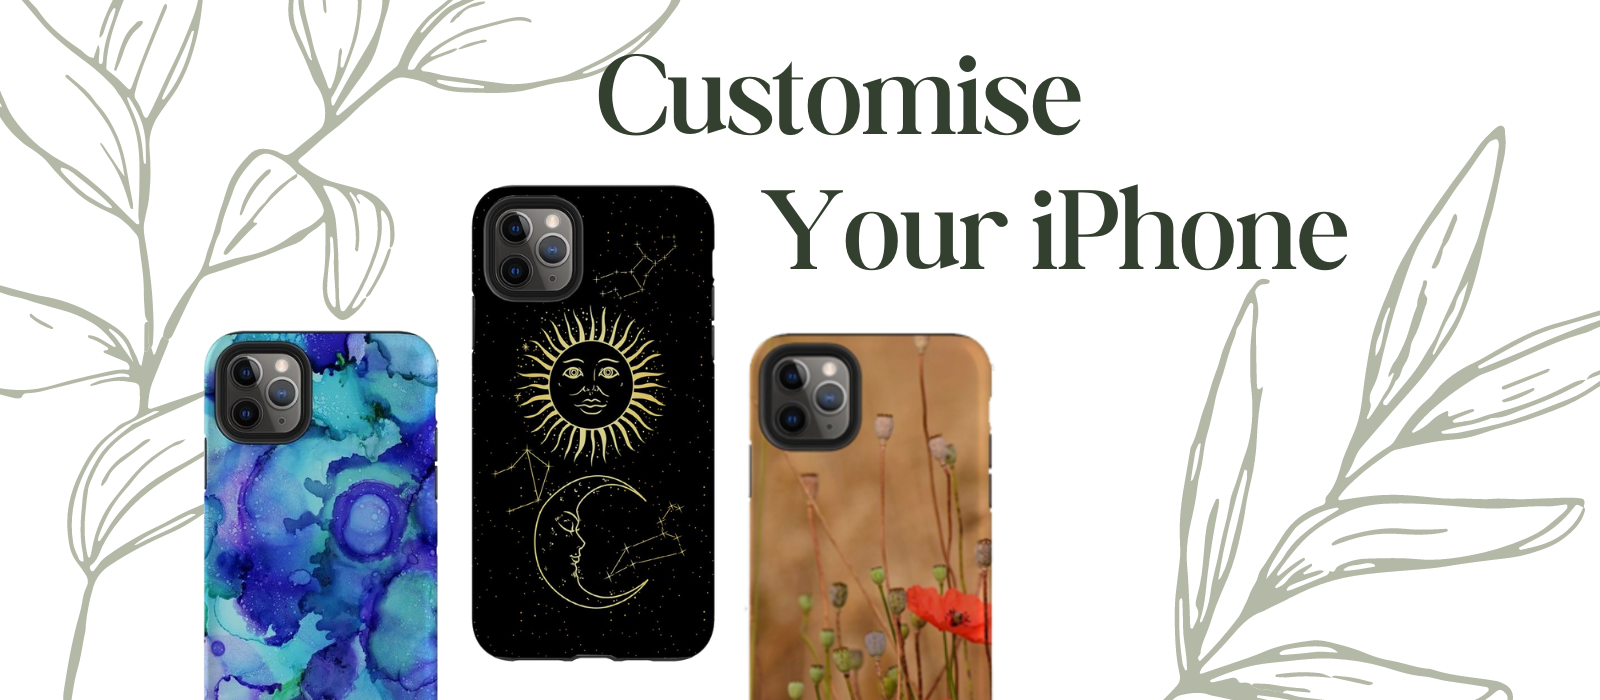 Customise Your iPhone with Unique and Stylish Cases